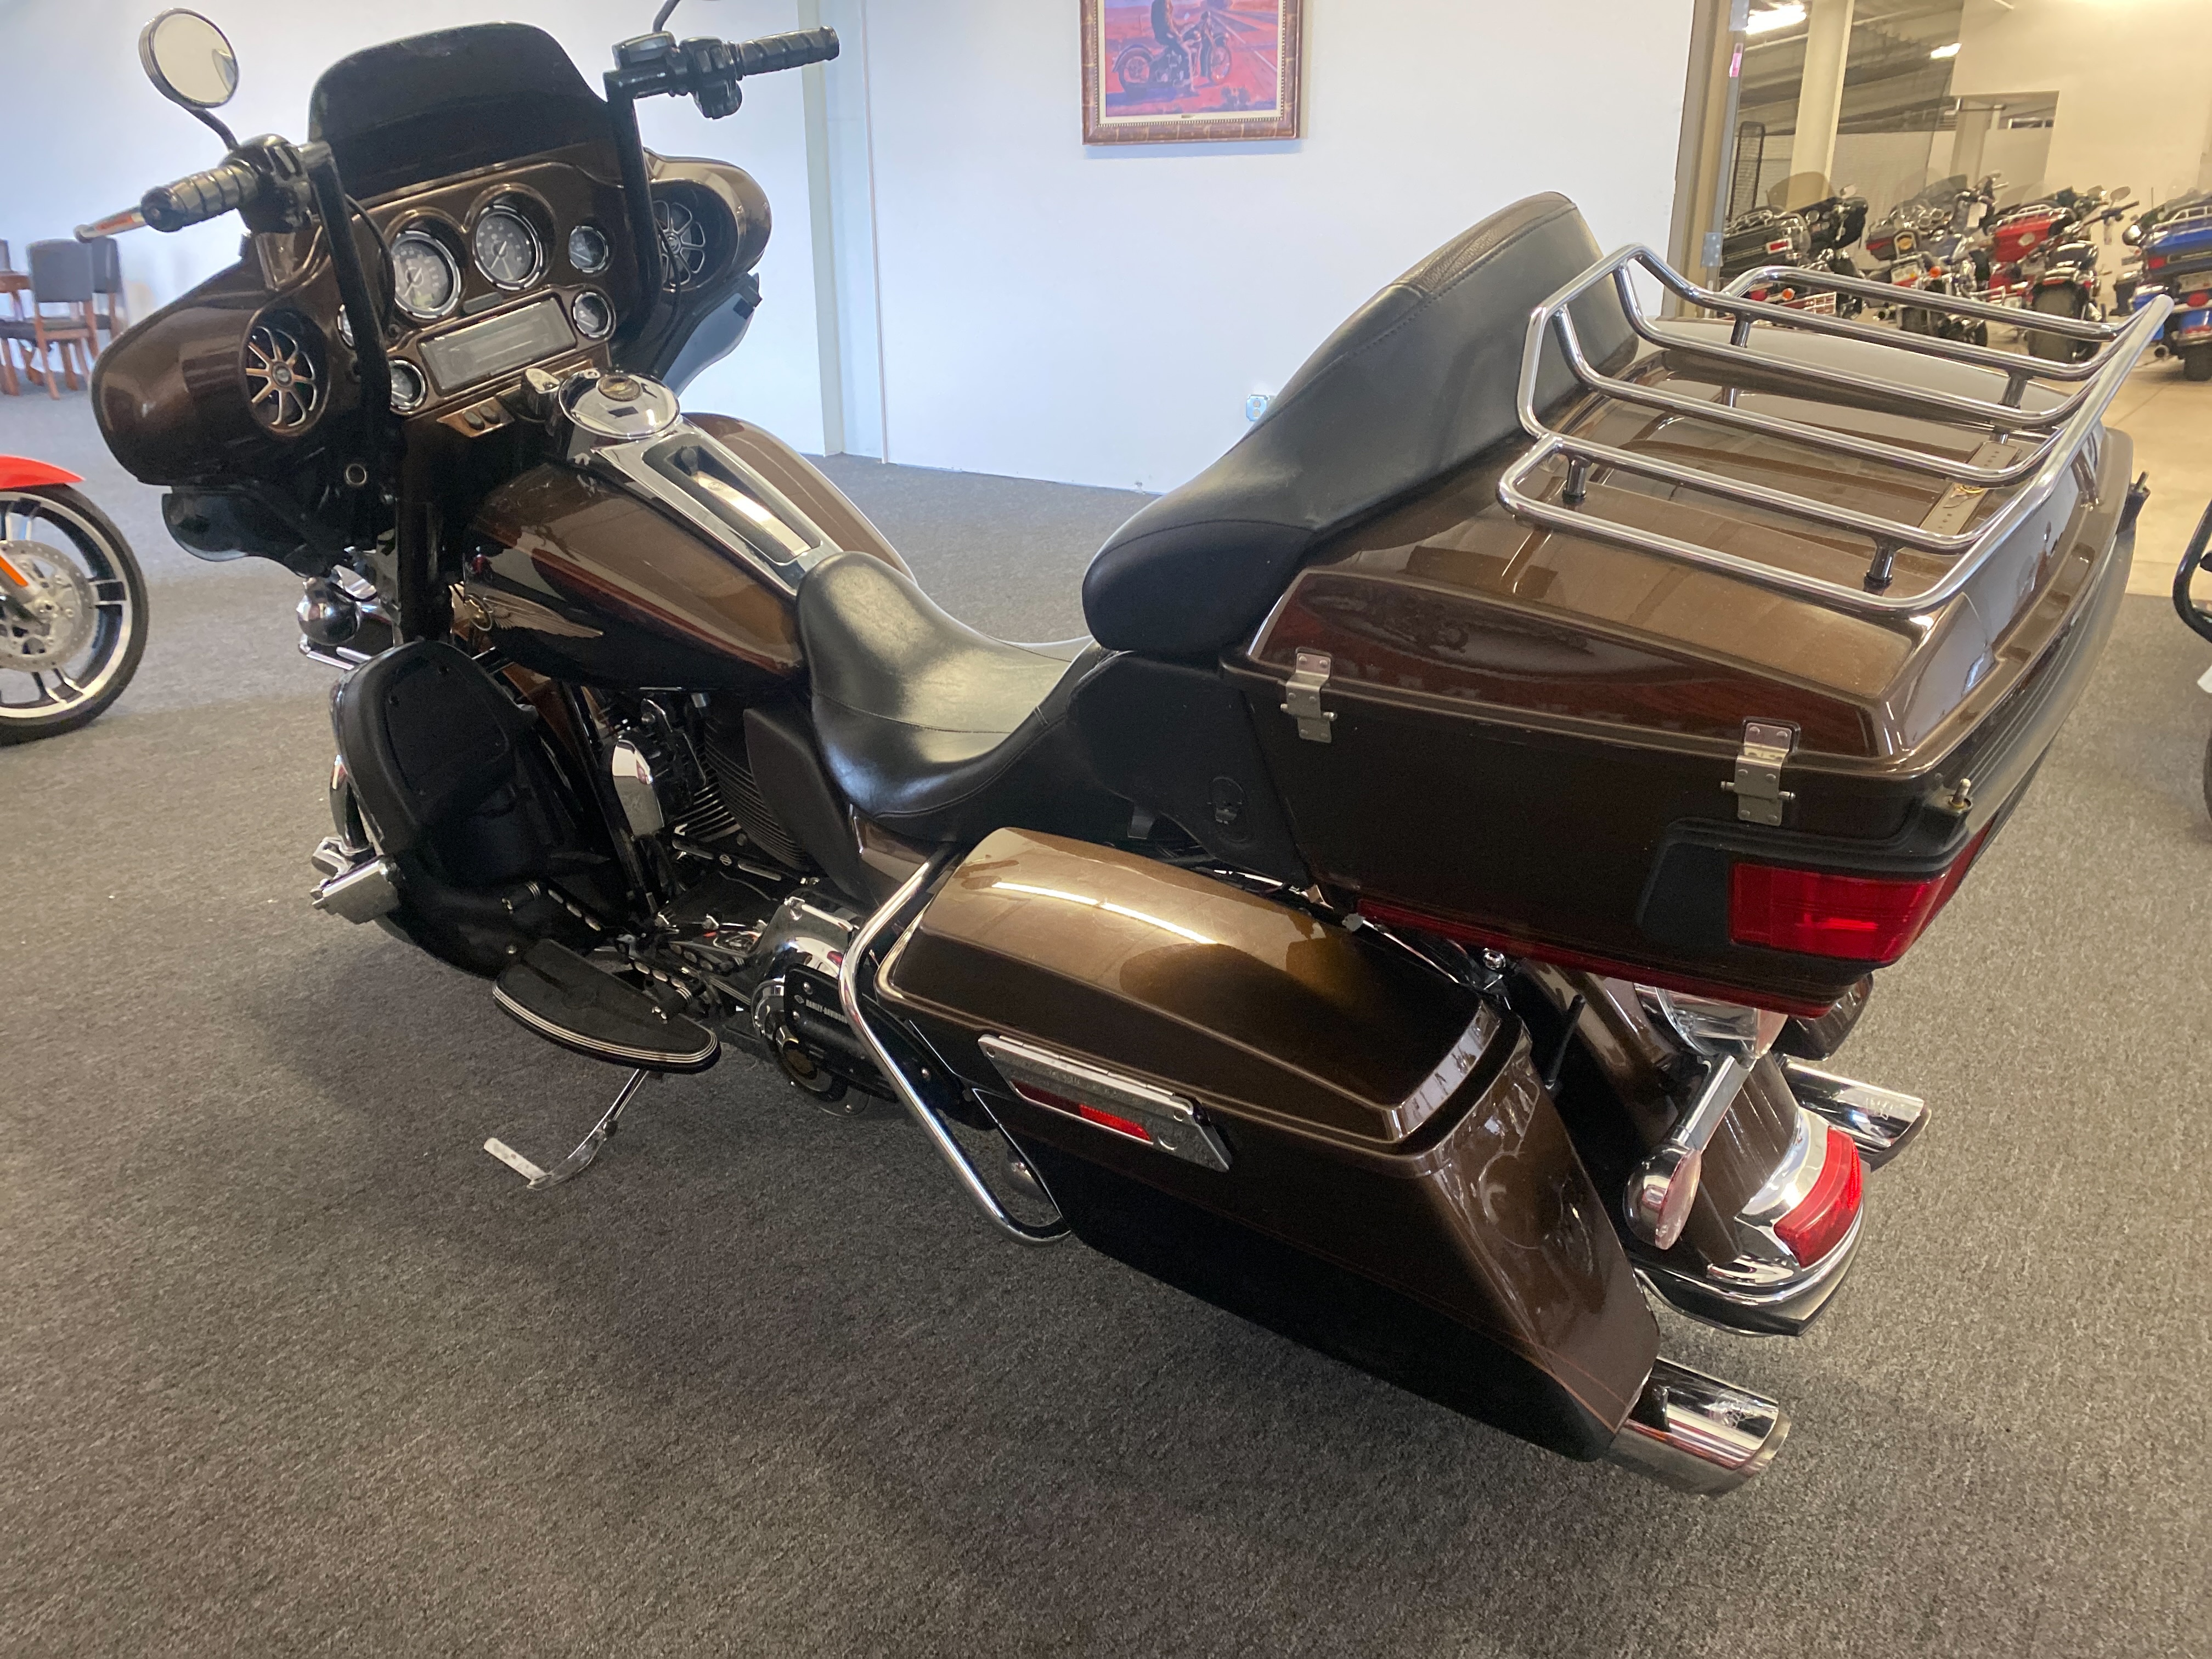 2013 Harley-Davidson Electra Glide Ultra Limited 110th Anniversary Edition at Outpost Harley-Davidson